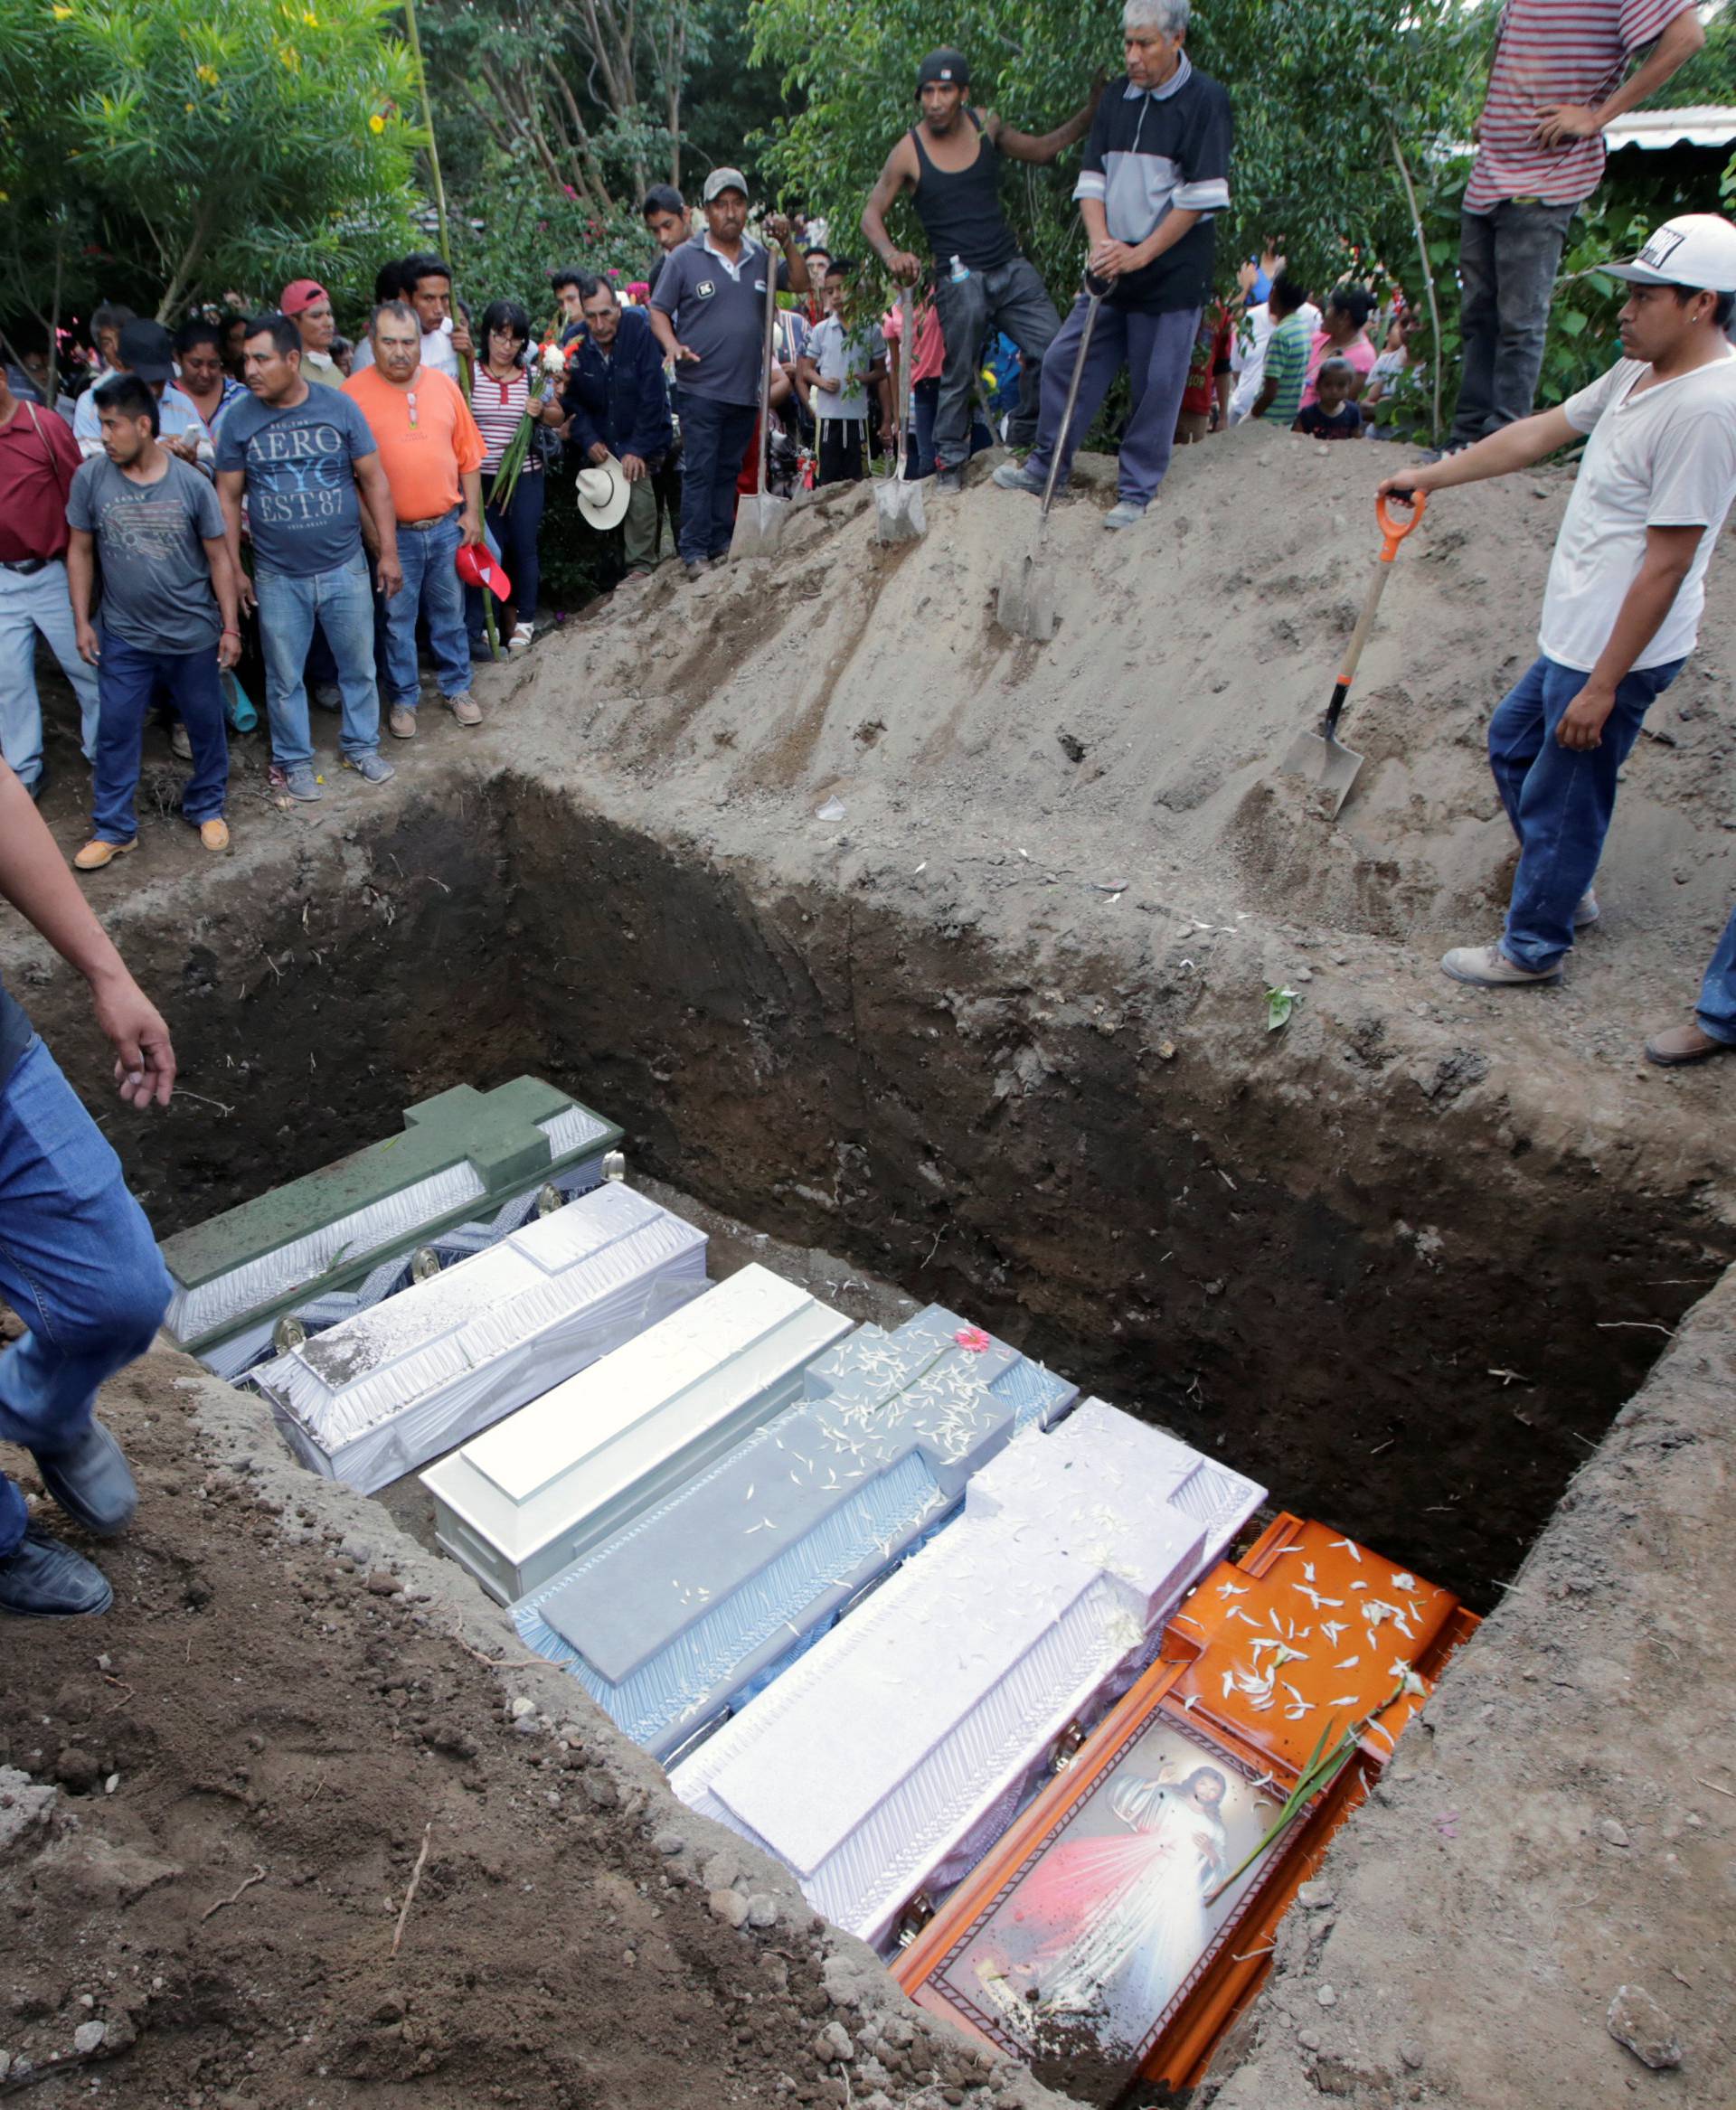 Caskets of earthquake victims are arranged in a grave, in Atzala